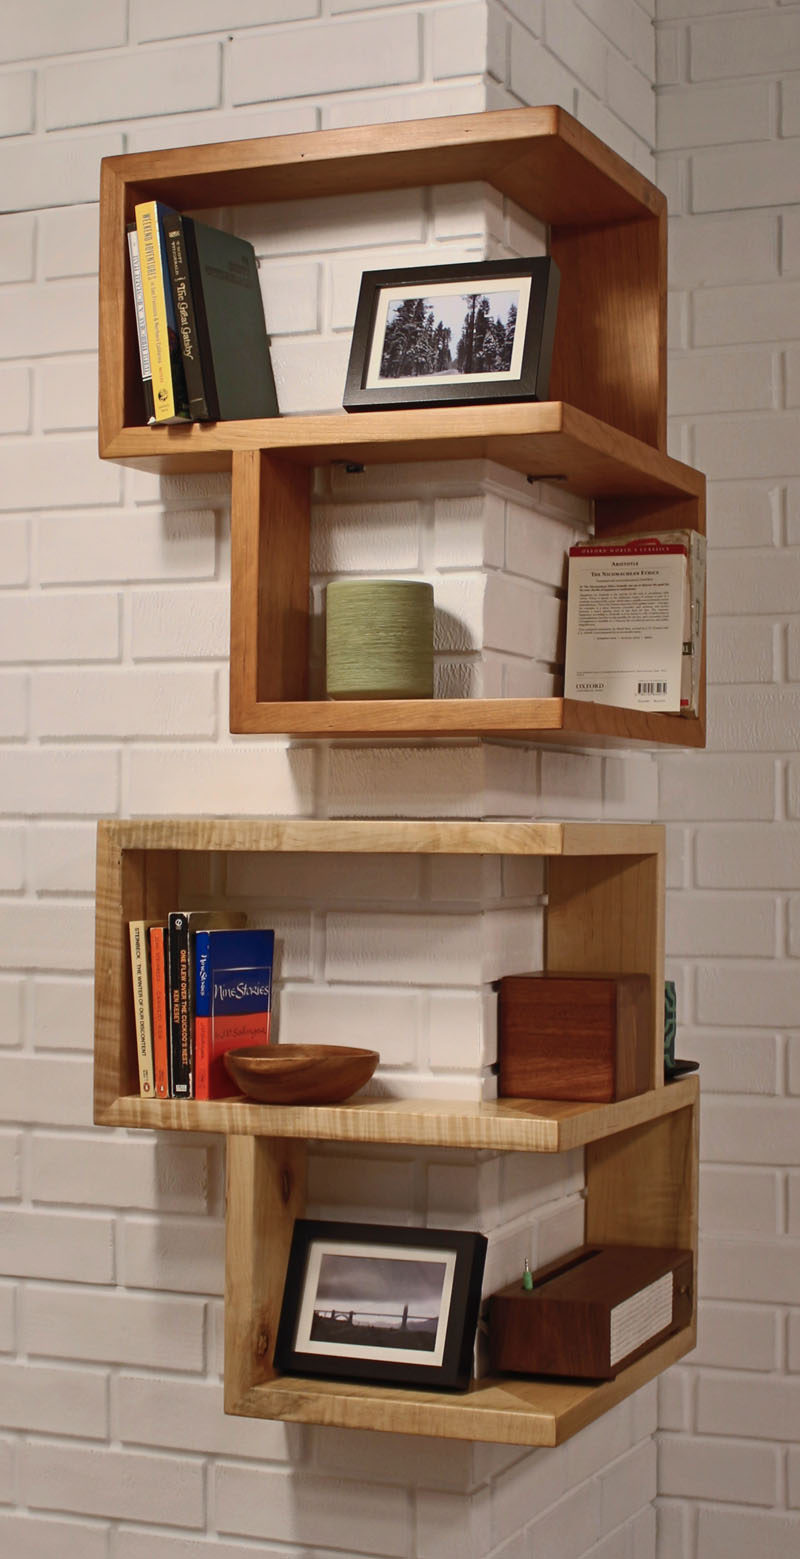 These box shelves hug the corners of your walls and make awkward corners turn into functional storage and decor spaces.